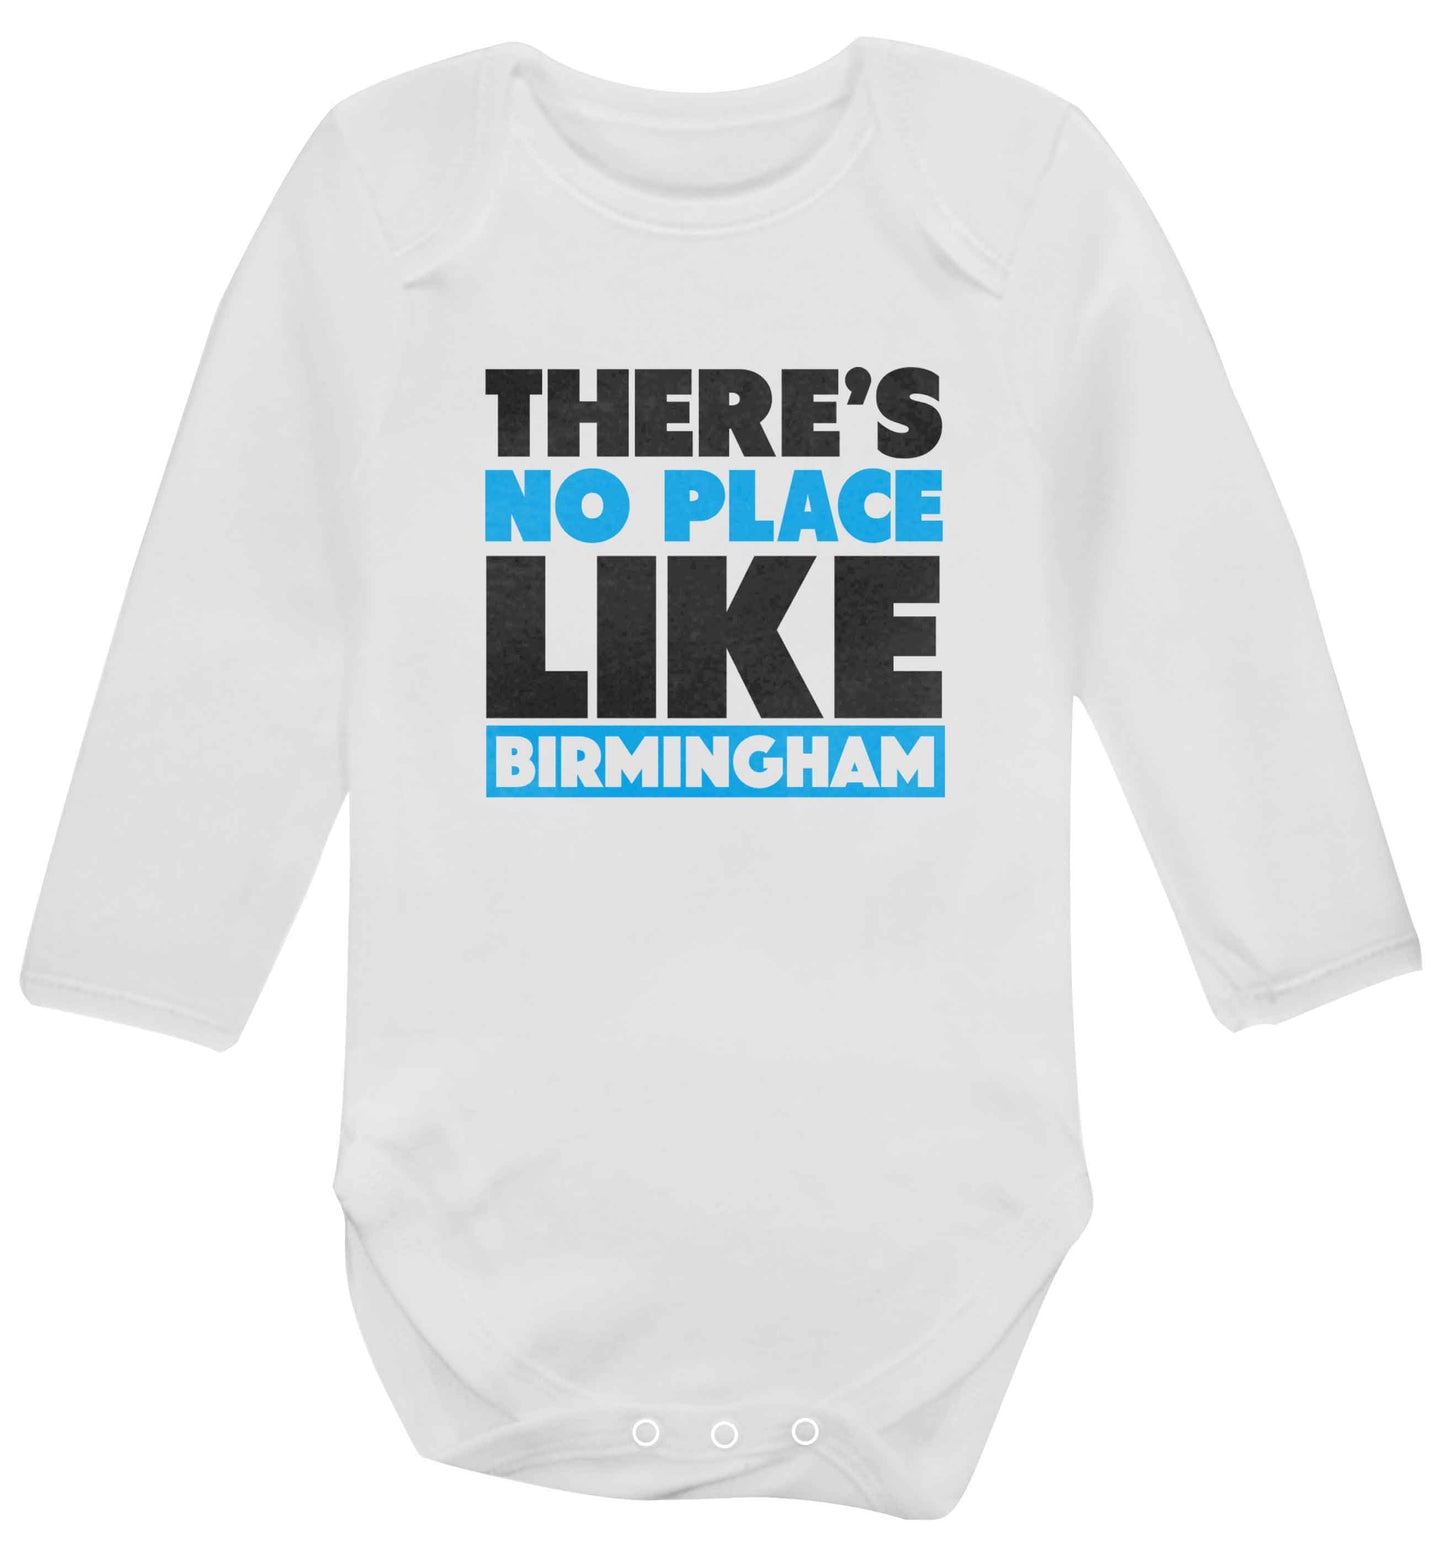 There's no place like Birmingham baby vest long sleeved white 6-12 months